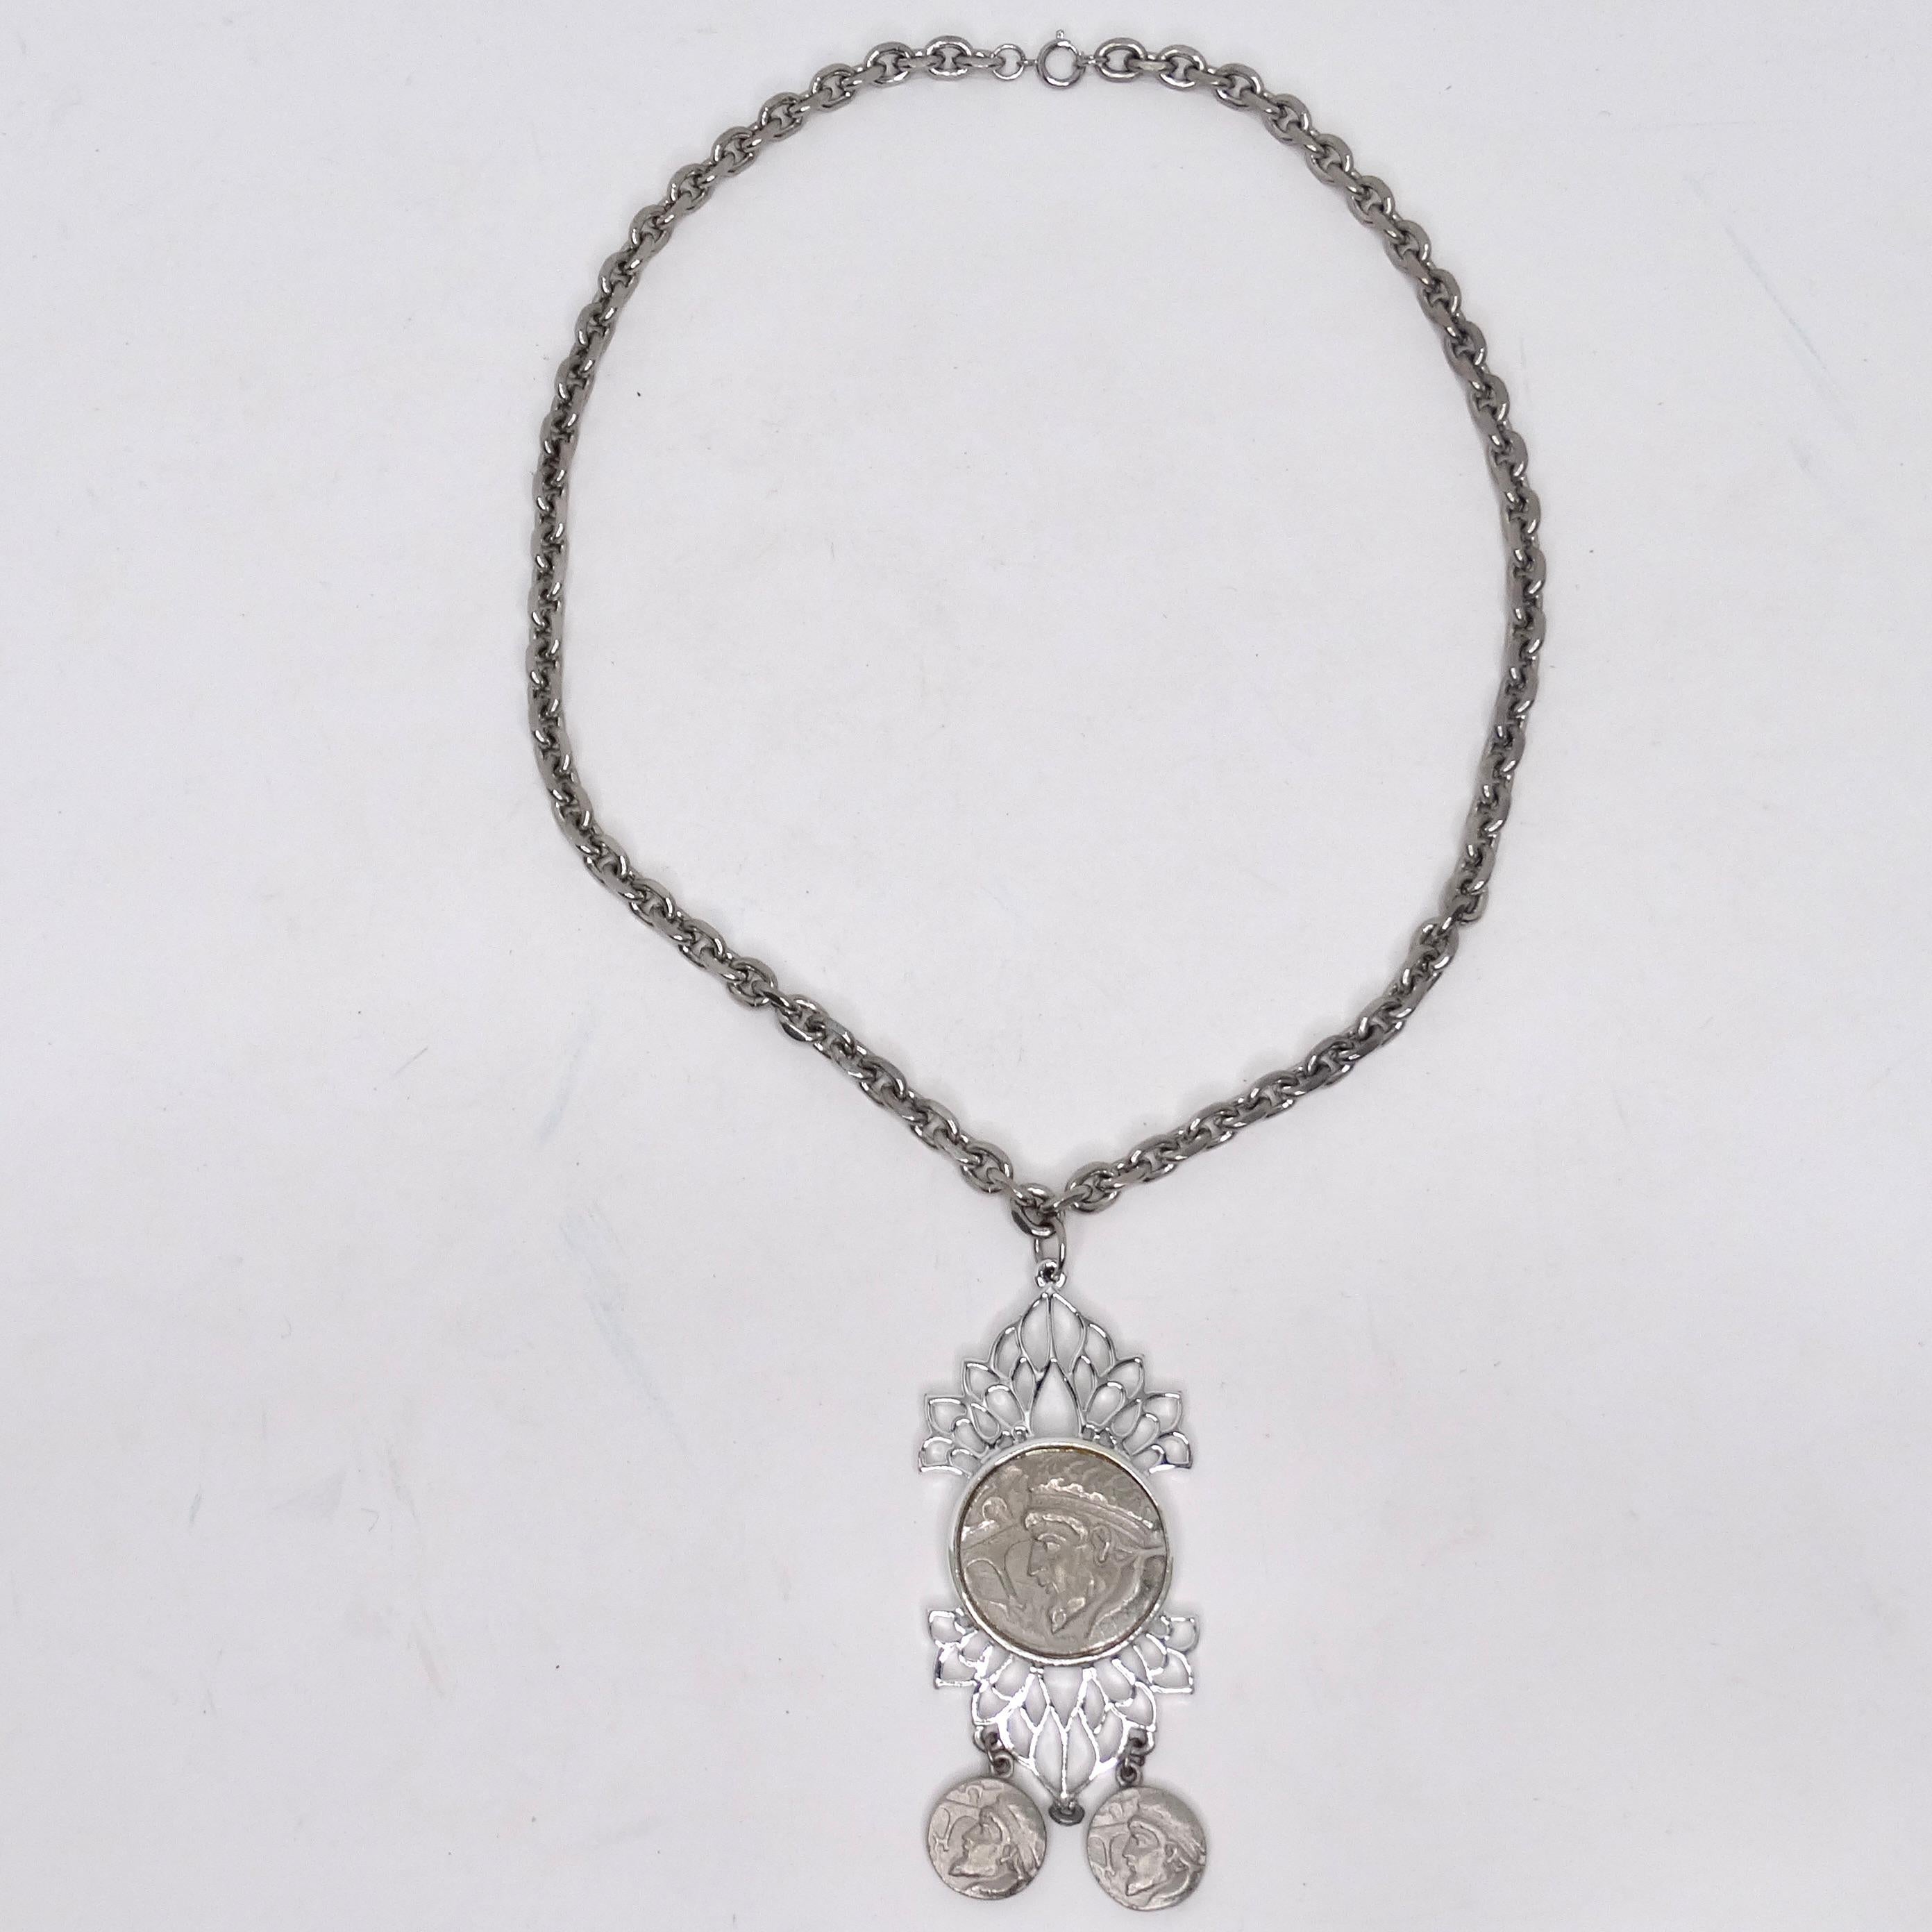 Silver Plated Roman Coin Medallion Pendant Necklace In Excellent Condition For Sale In Scottsdale, AZ